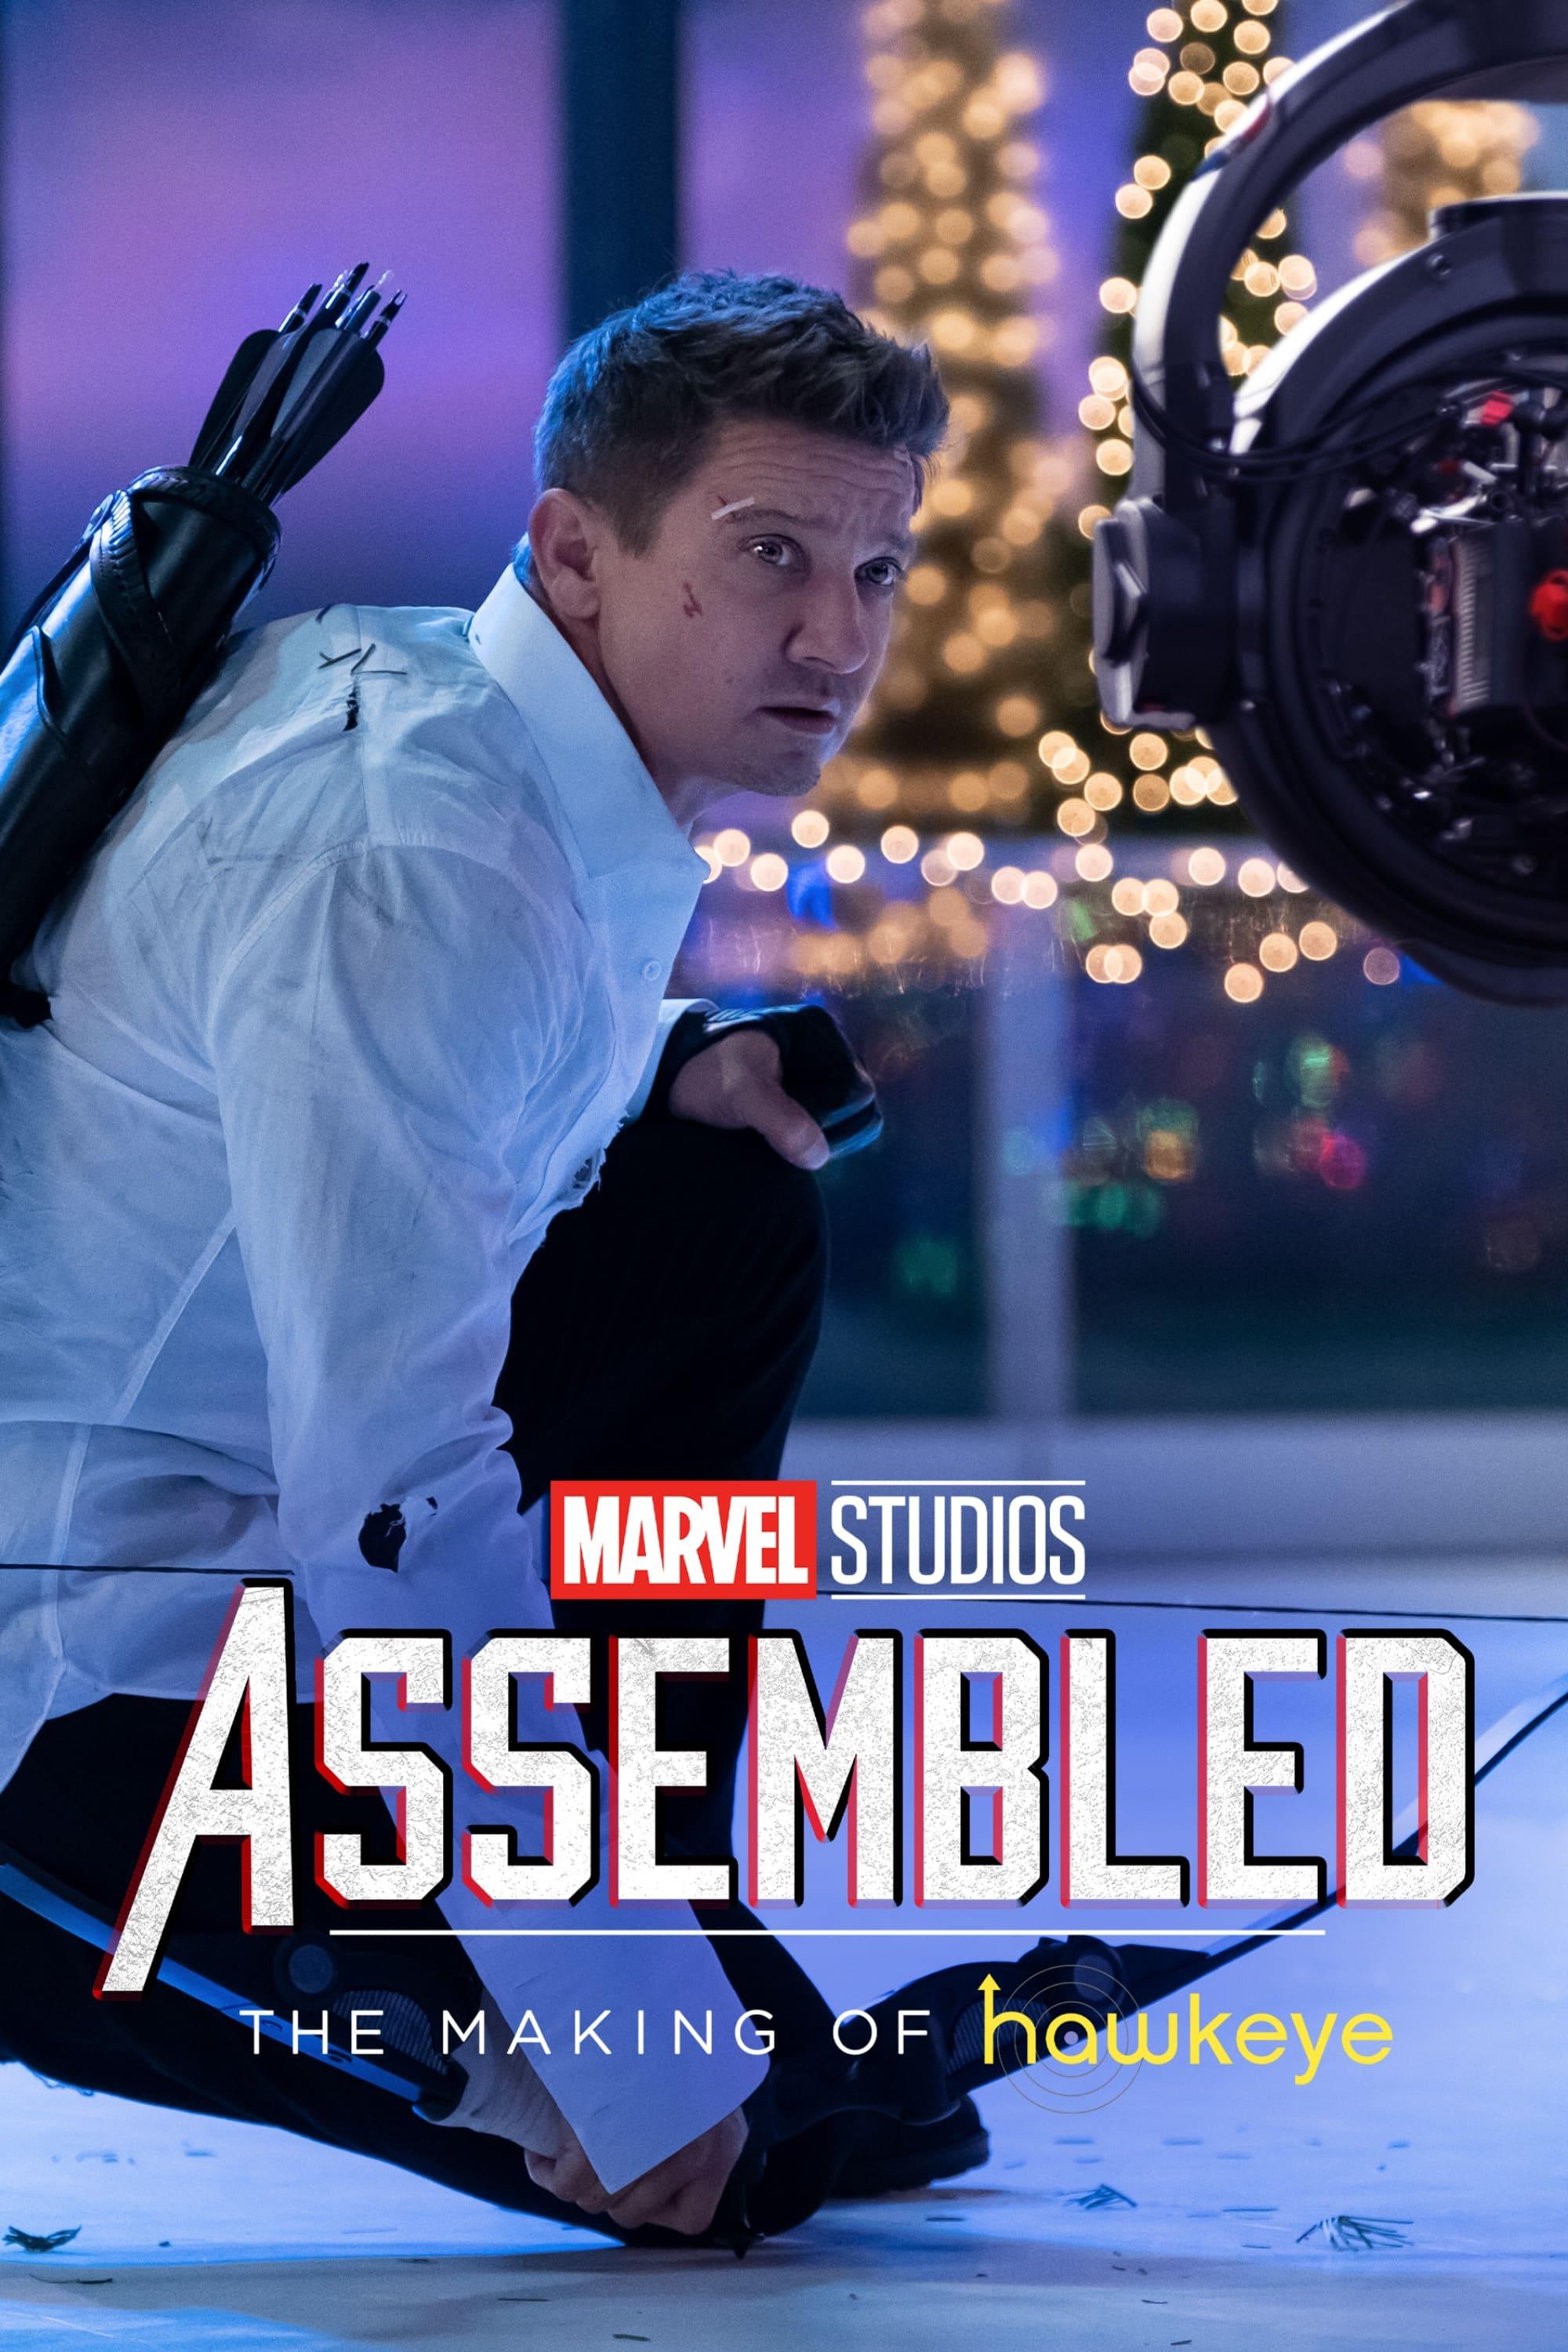 Marvel Studios Assembled: The Making of Hawkeye poster